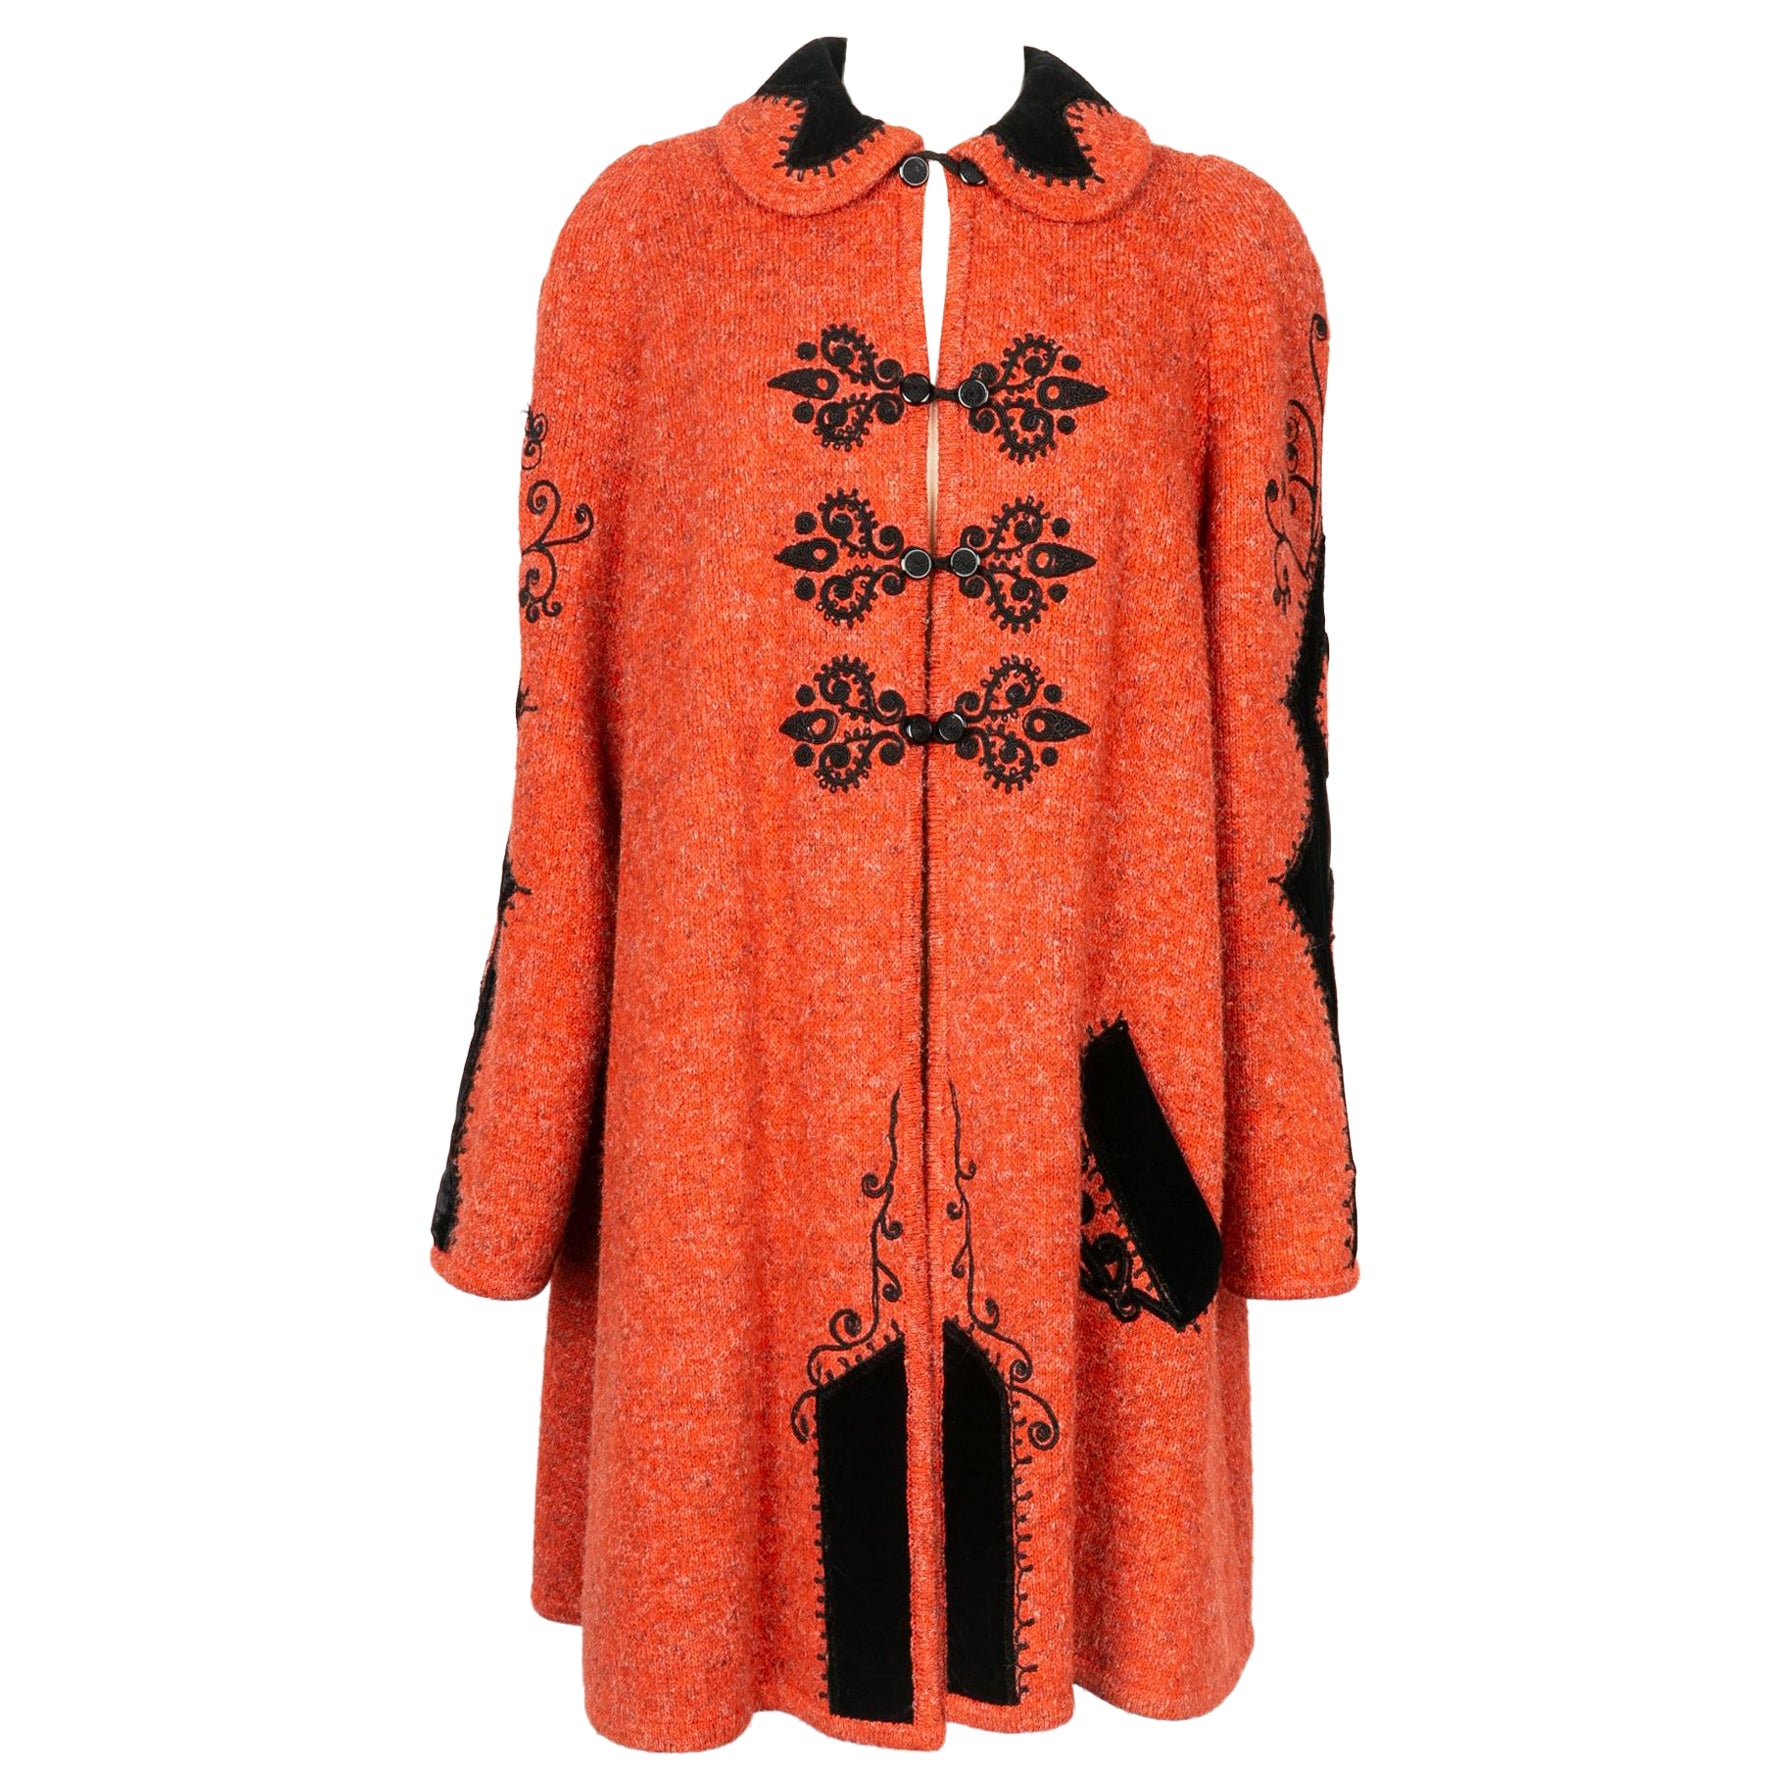 Christian Lacroix Wool and Passementerie Coat